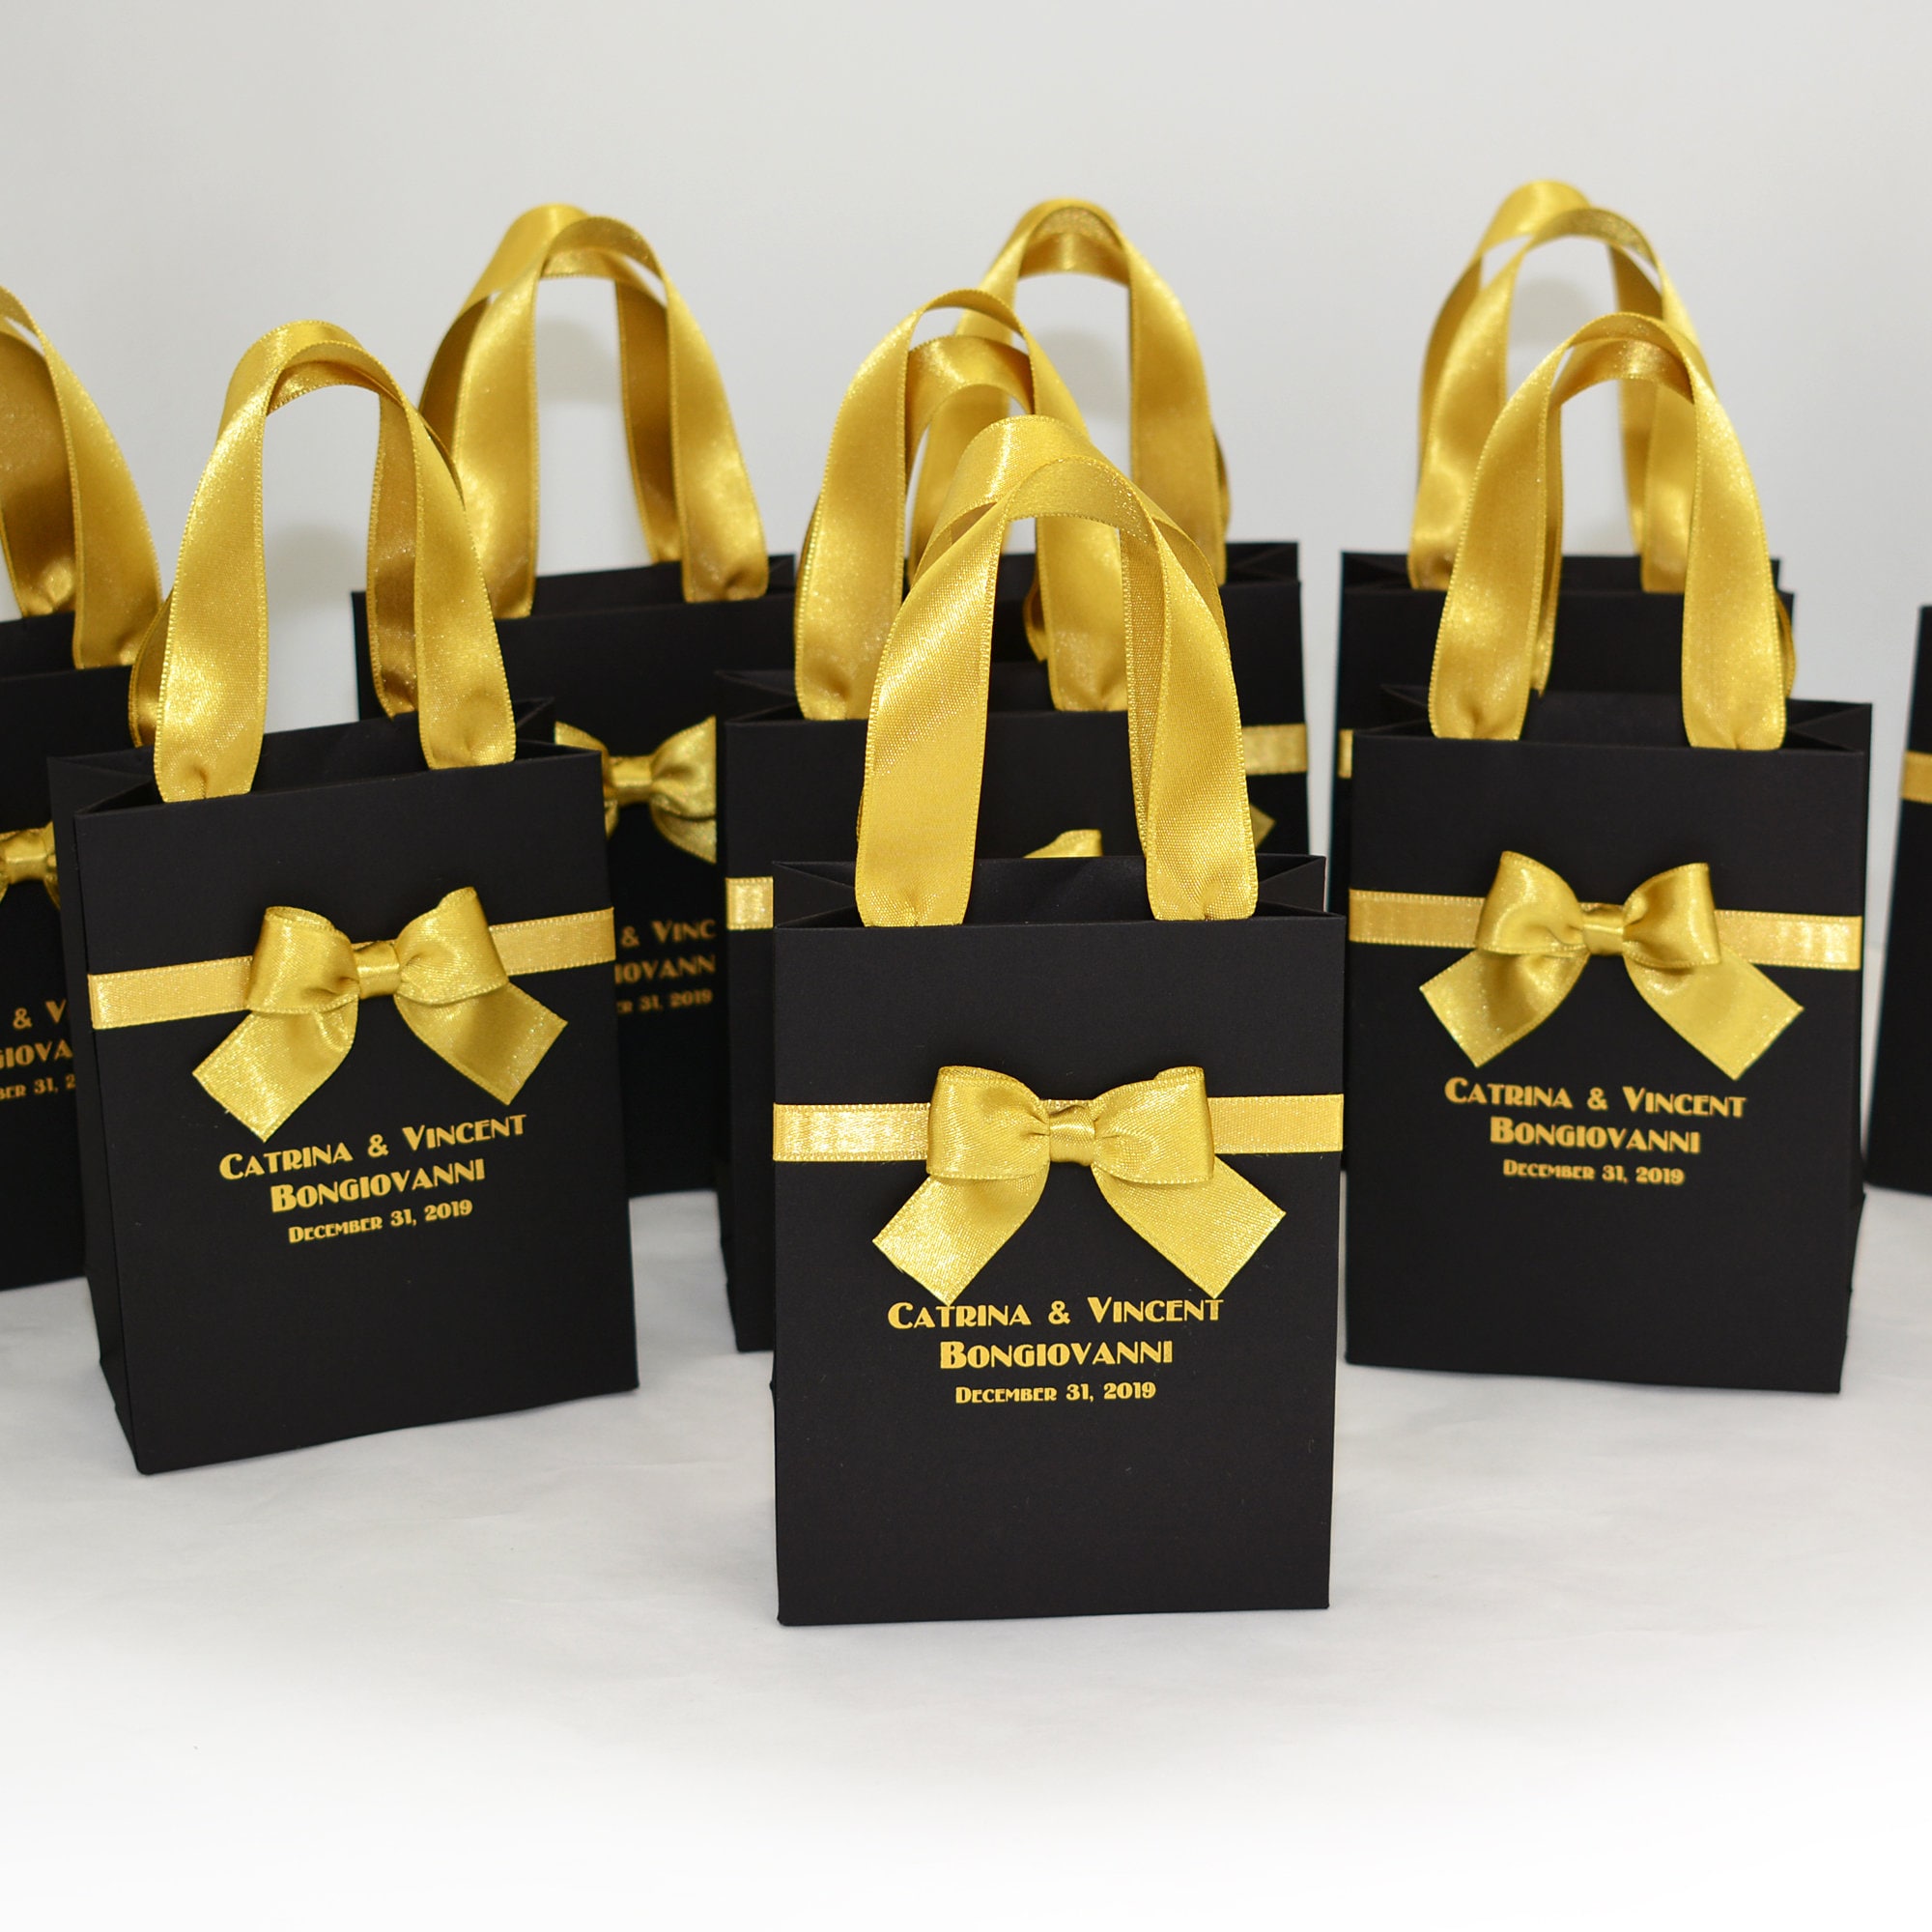 25 Chic Wedding Gift Bags With Satin Ribbon Handles, Bow and Your Names  Personalized Black & Gold Gatsby Theme Wedding Favors for Guests 